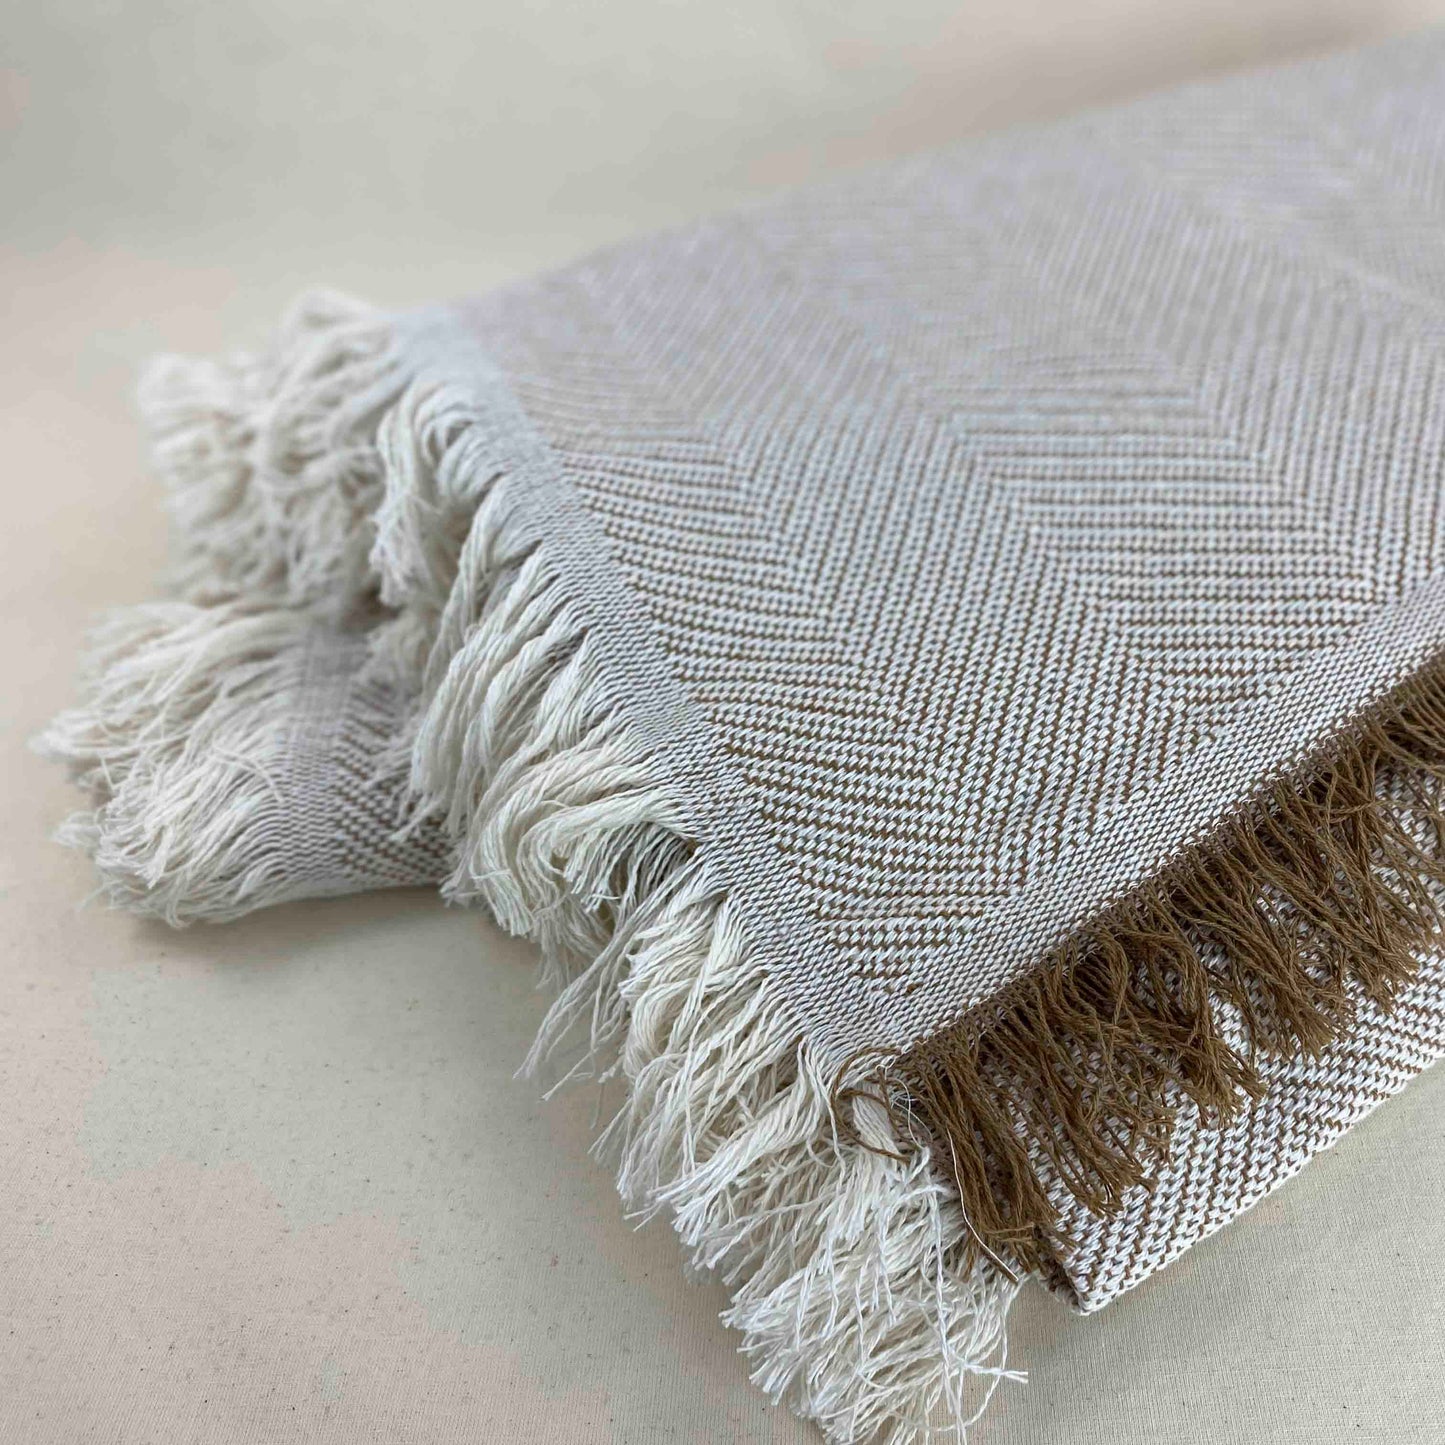 Multipurpose bedspread for sofa or bed with fringes. Beige and Ecru color.